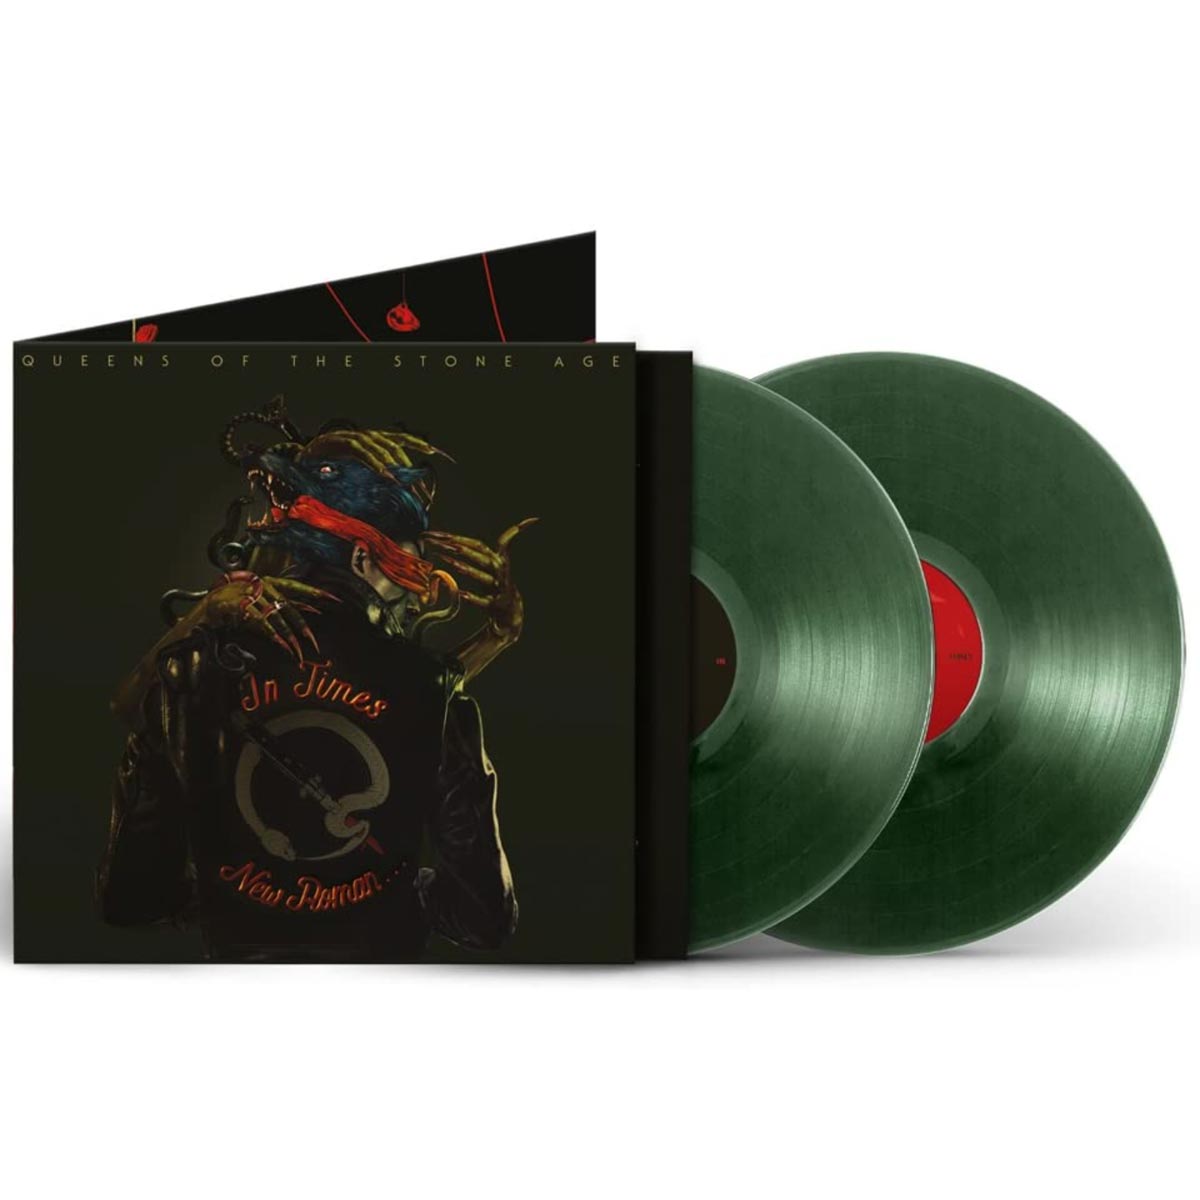 Queens Of The Stone Age - In Times New Roman... (Green Vinyl) - 2 x LP